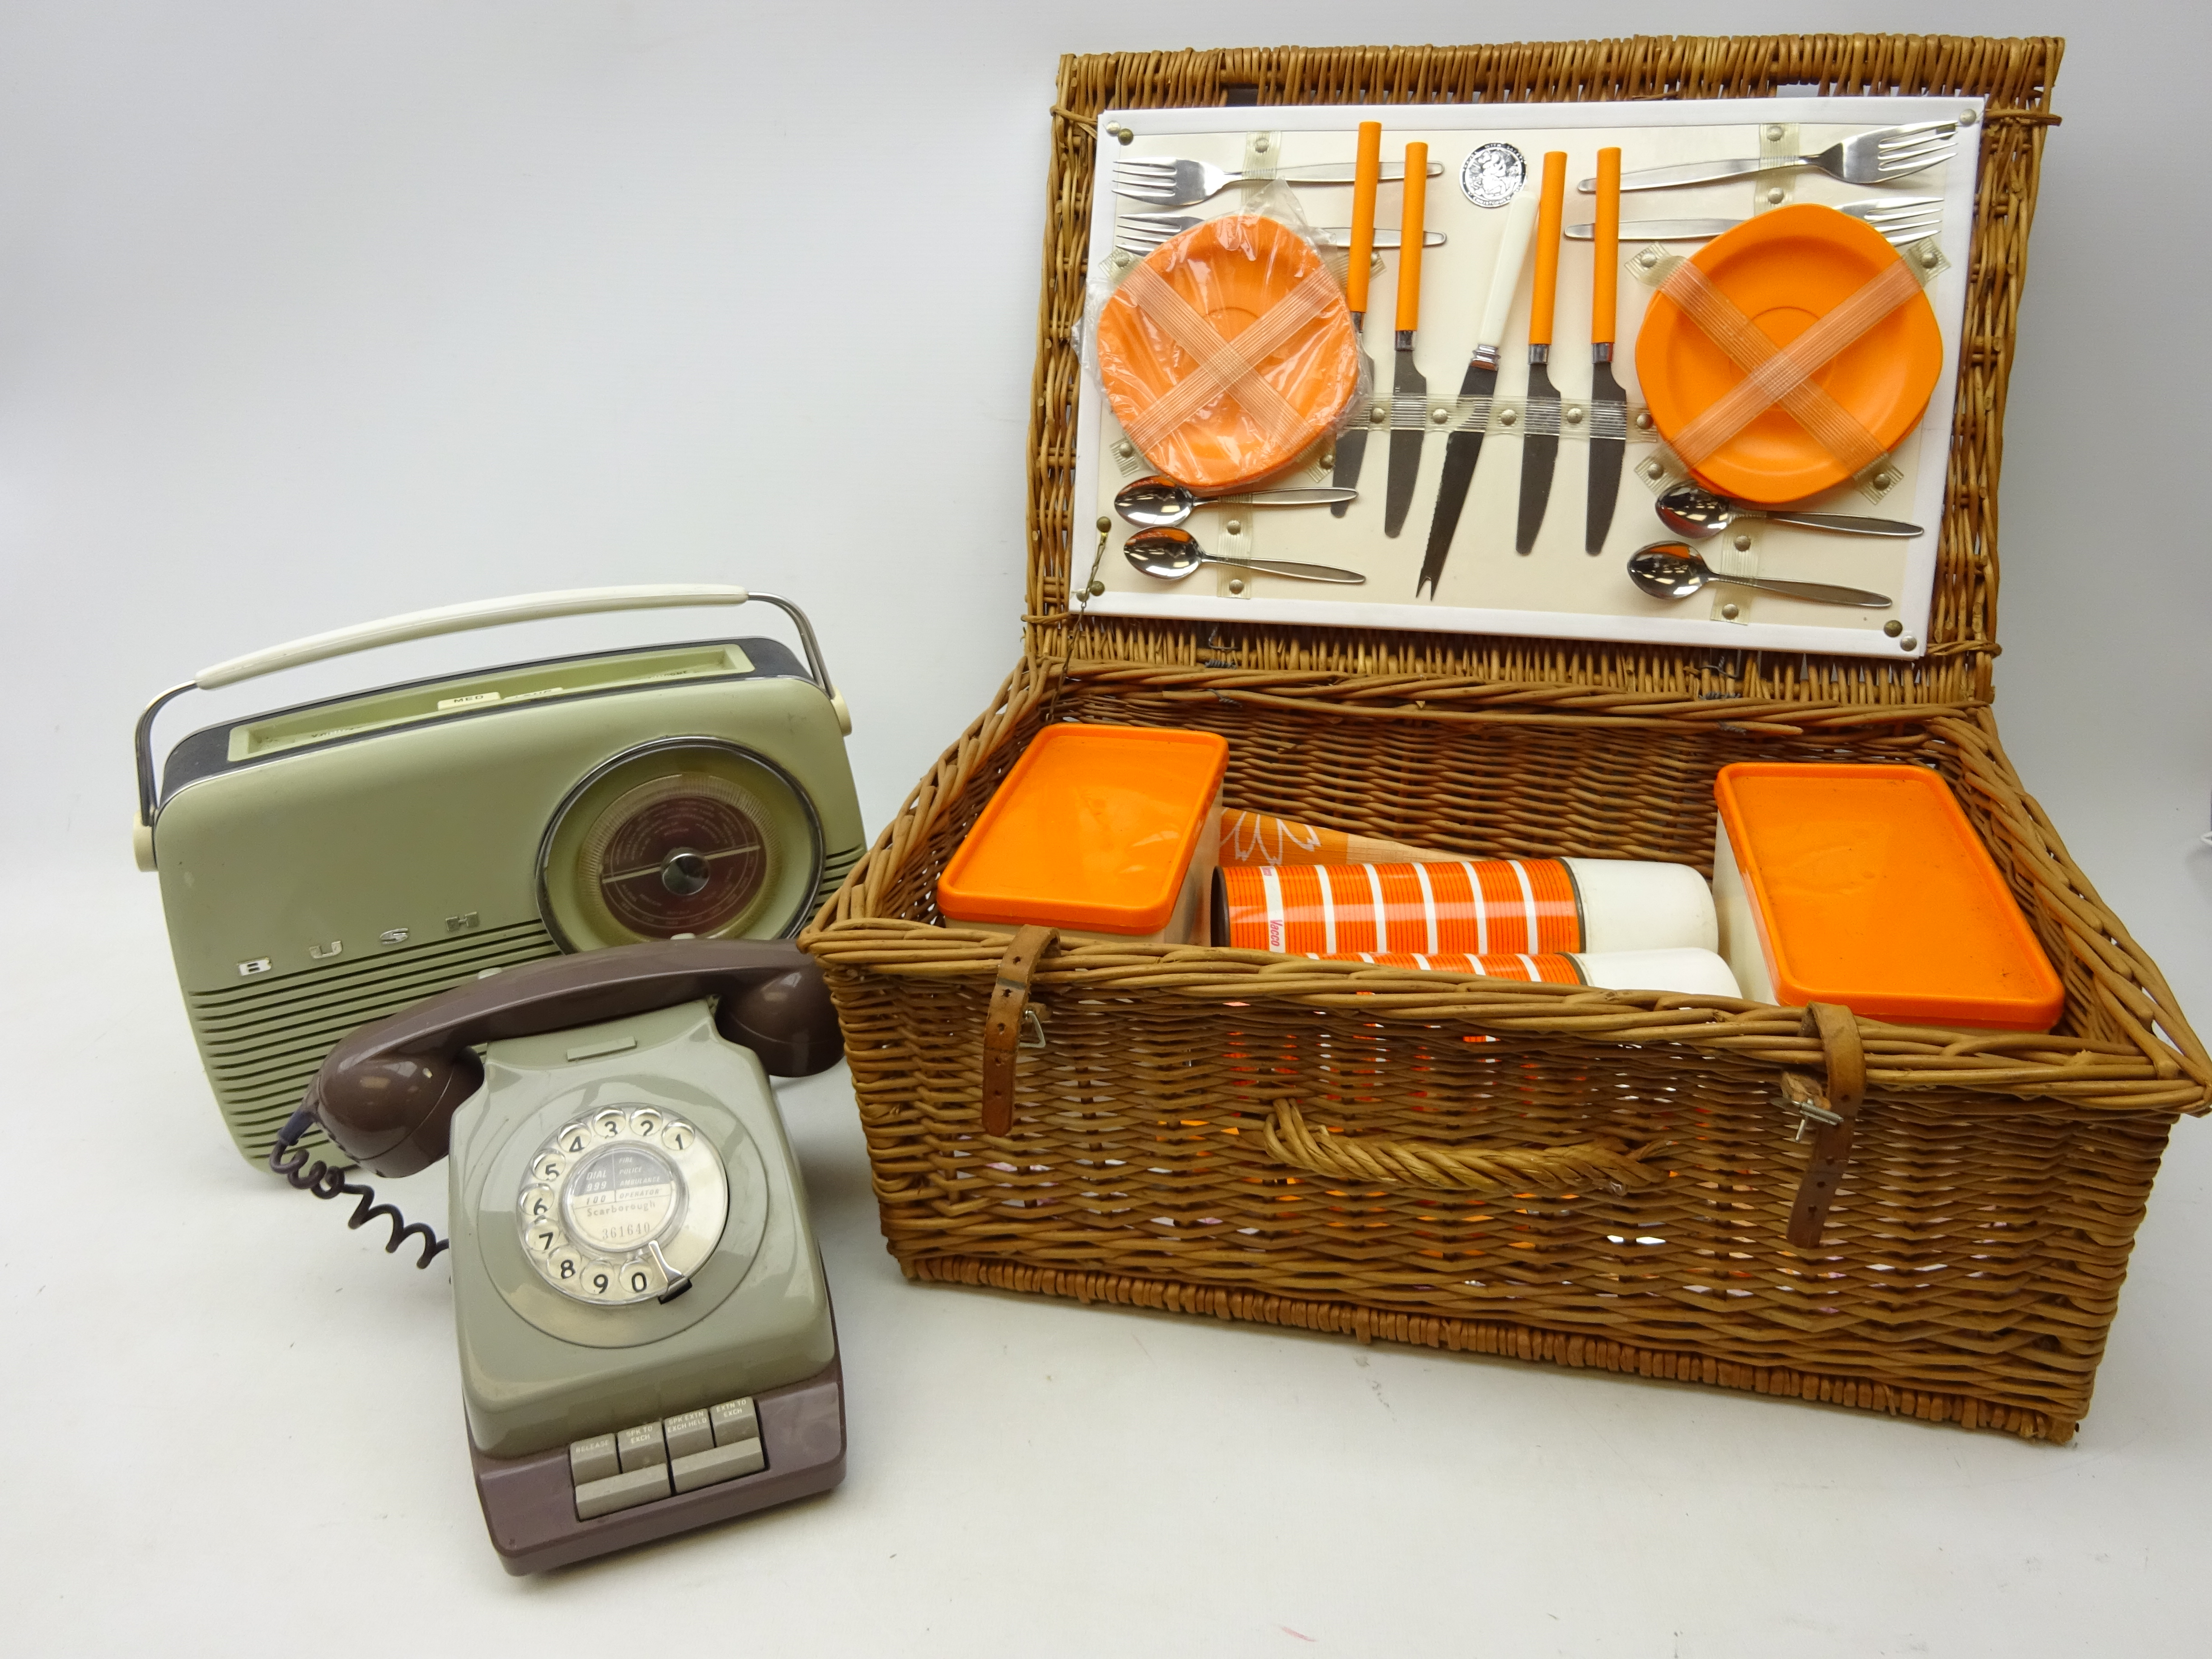 Vintage Bush radio, Vintage dial-up telephone and a wicker picnic hamper with contents,